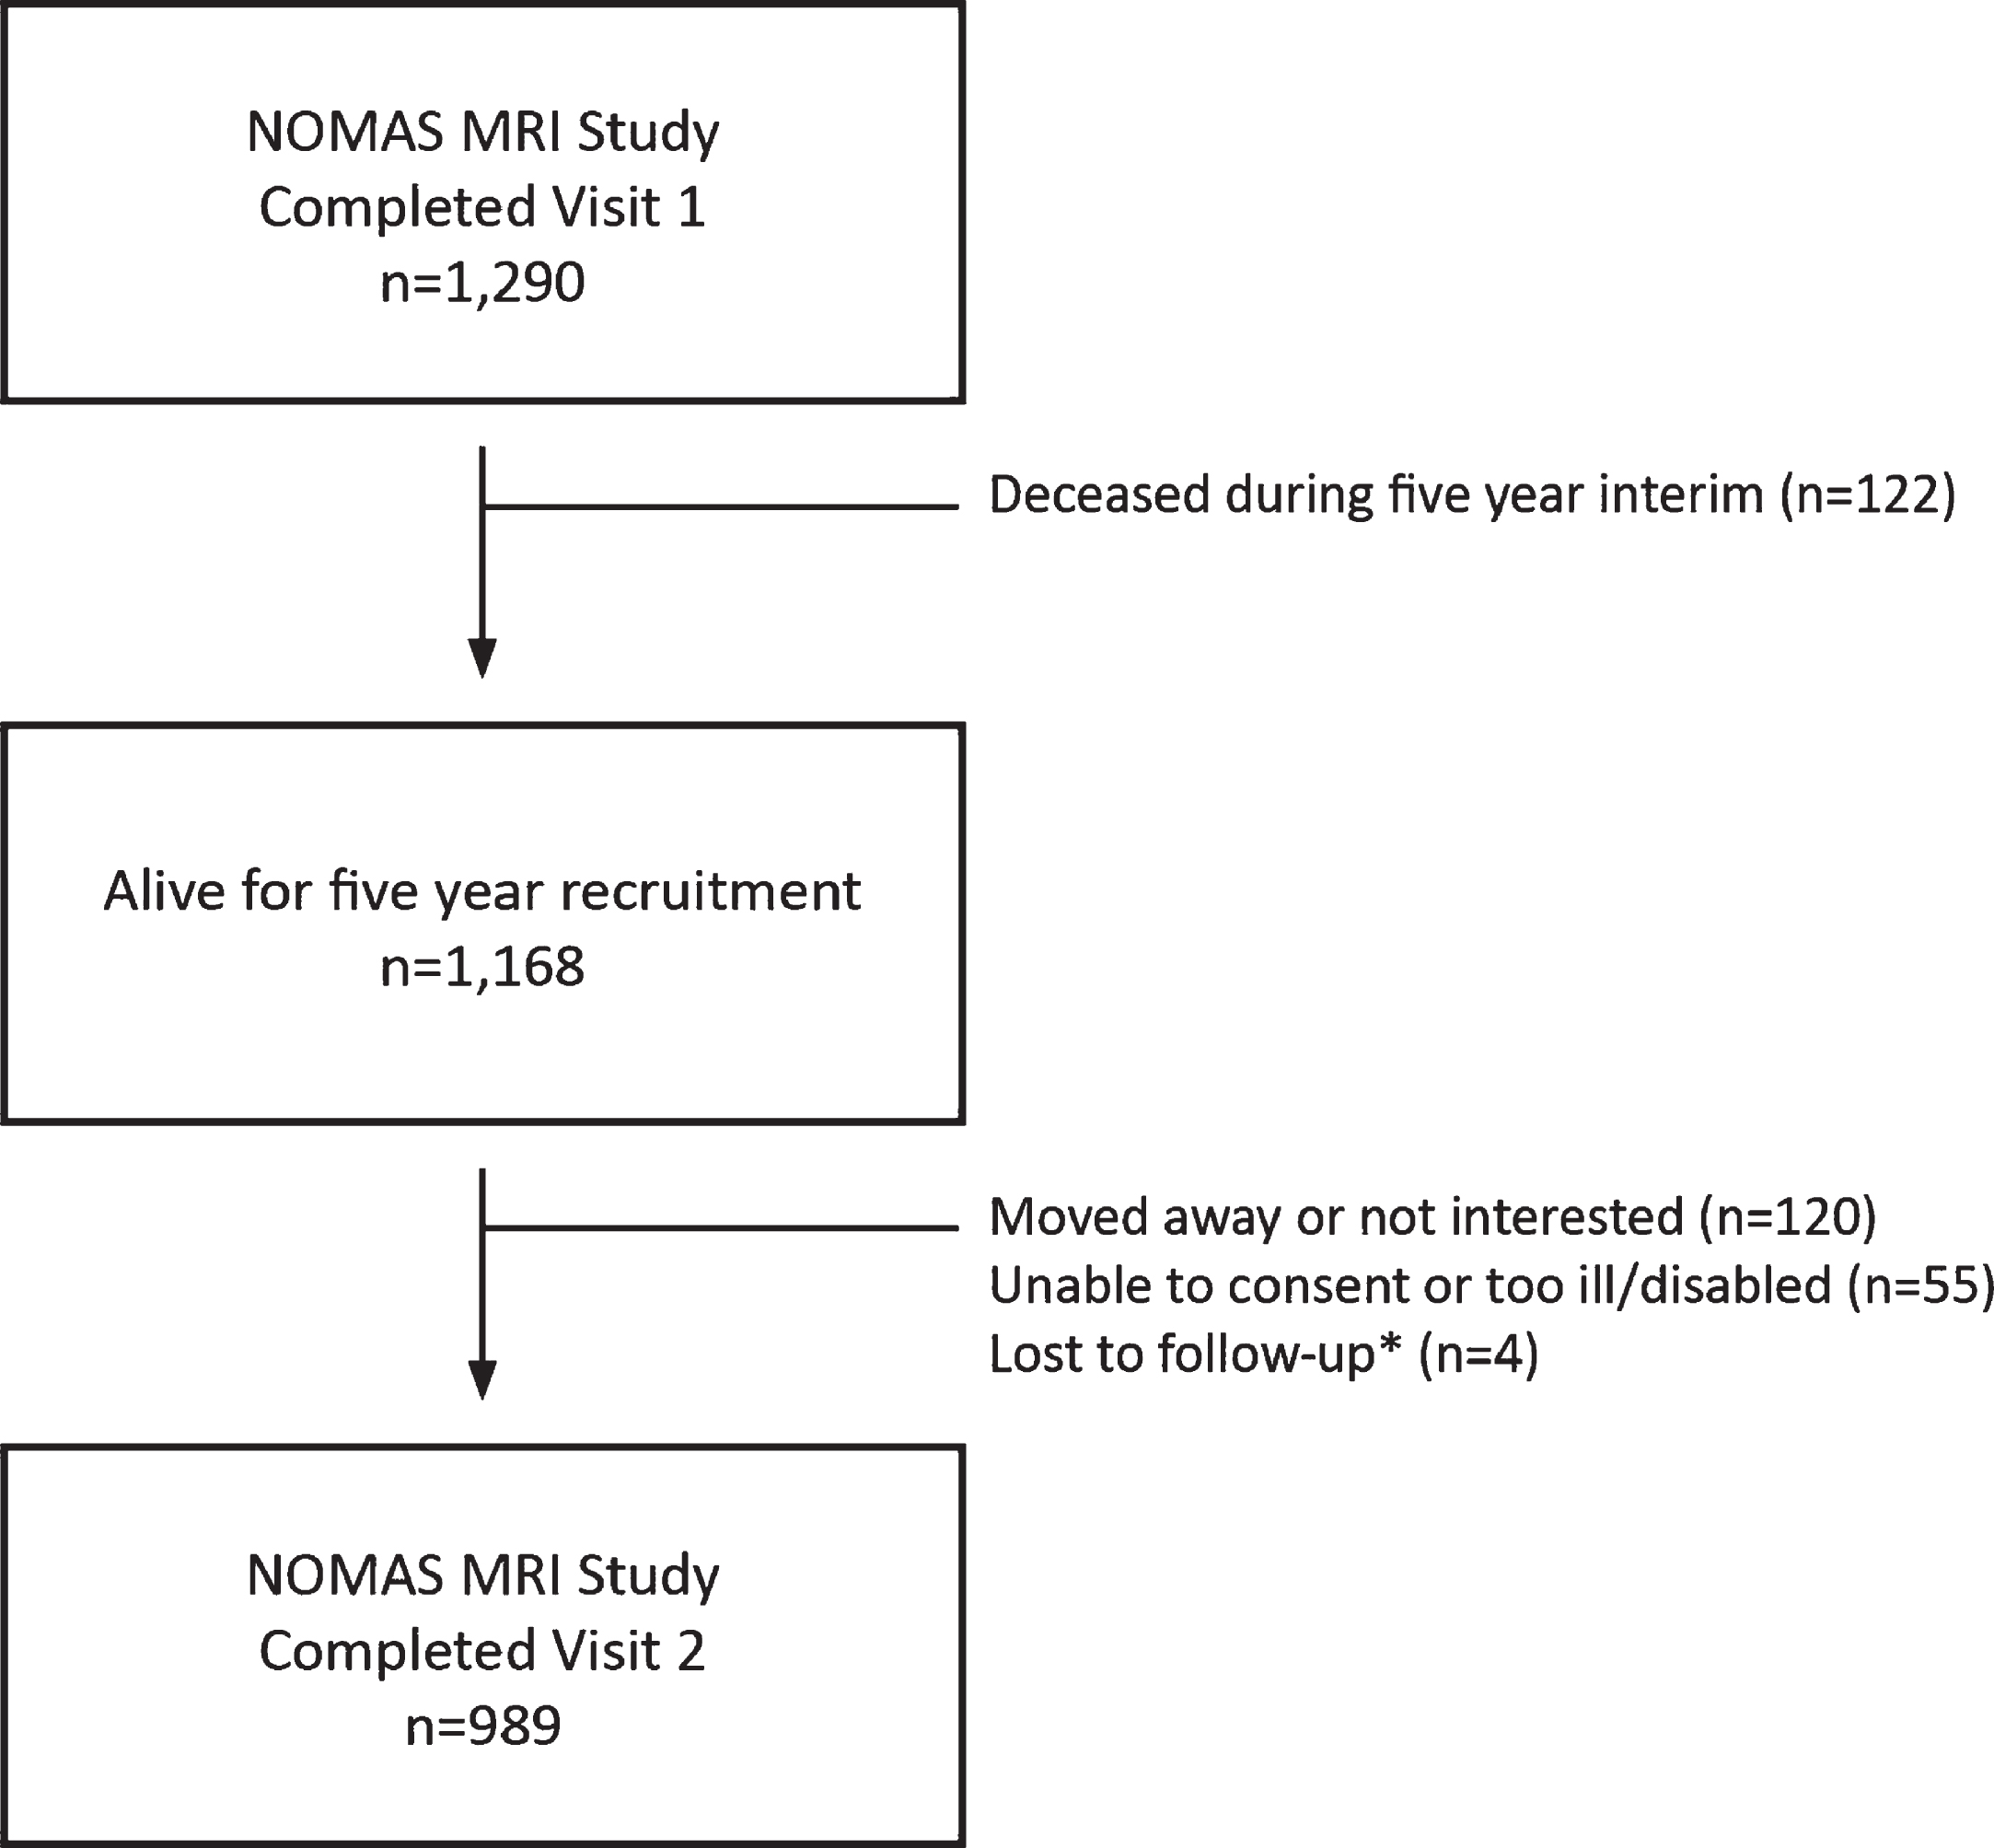 Flow chart showing NOMAS MRI sample participation in first and second in-person assessments. *Loss to follow-up may be temporary as attempts to recontact continue.